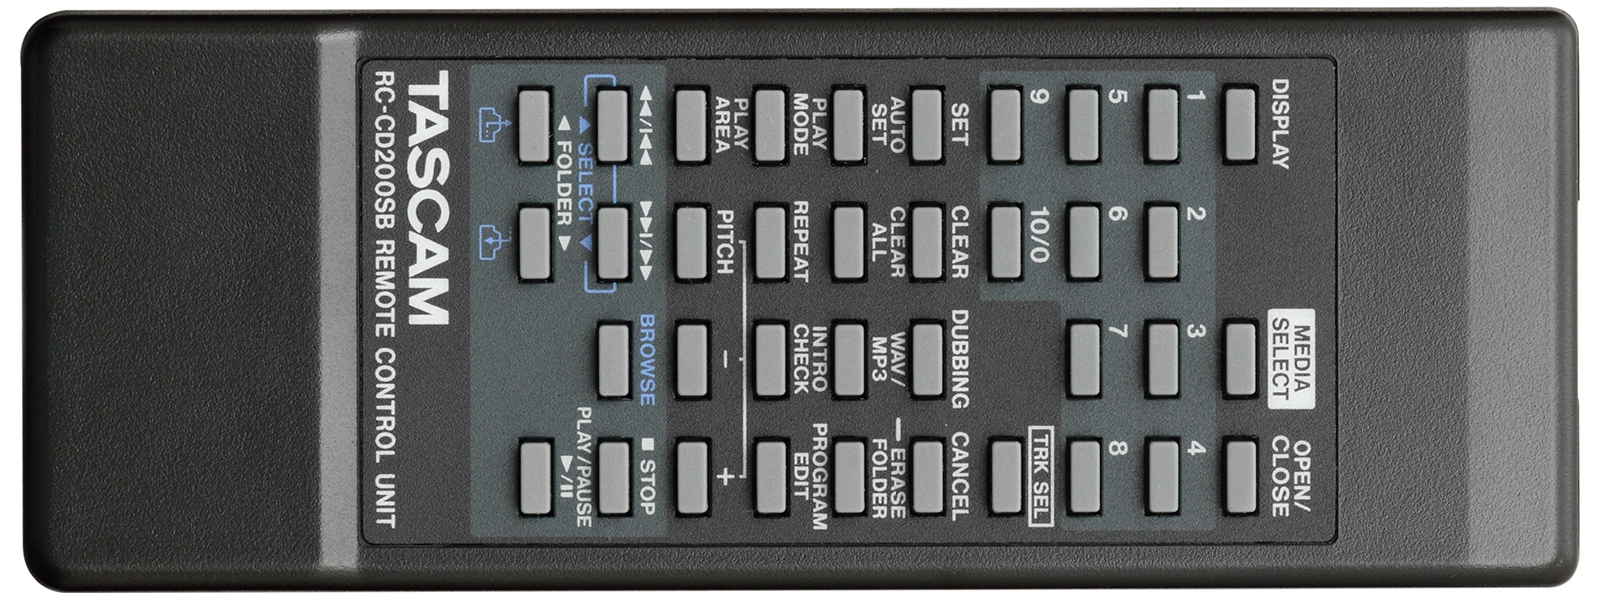 CD-200SB | FEATURES | TASCAM - United States